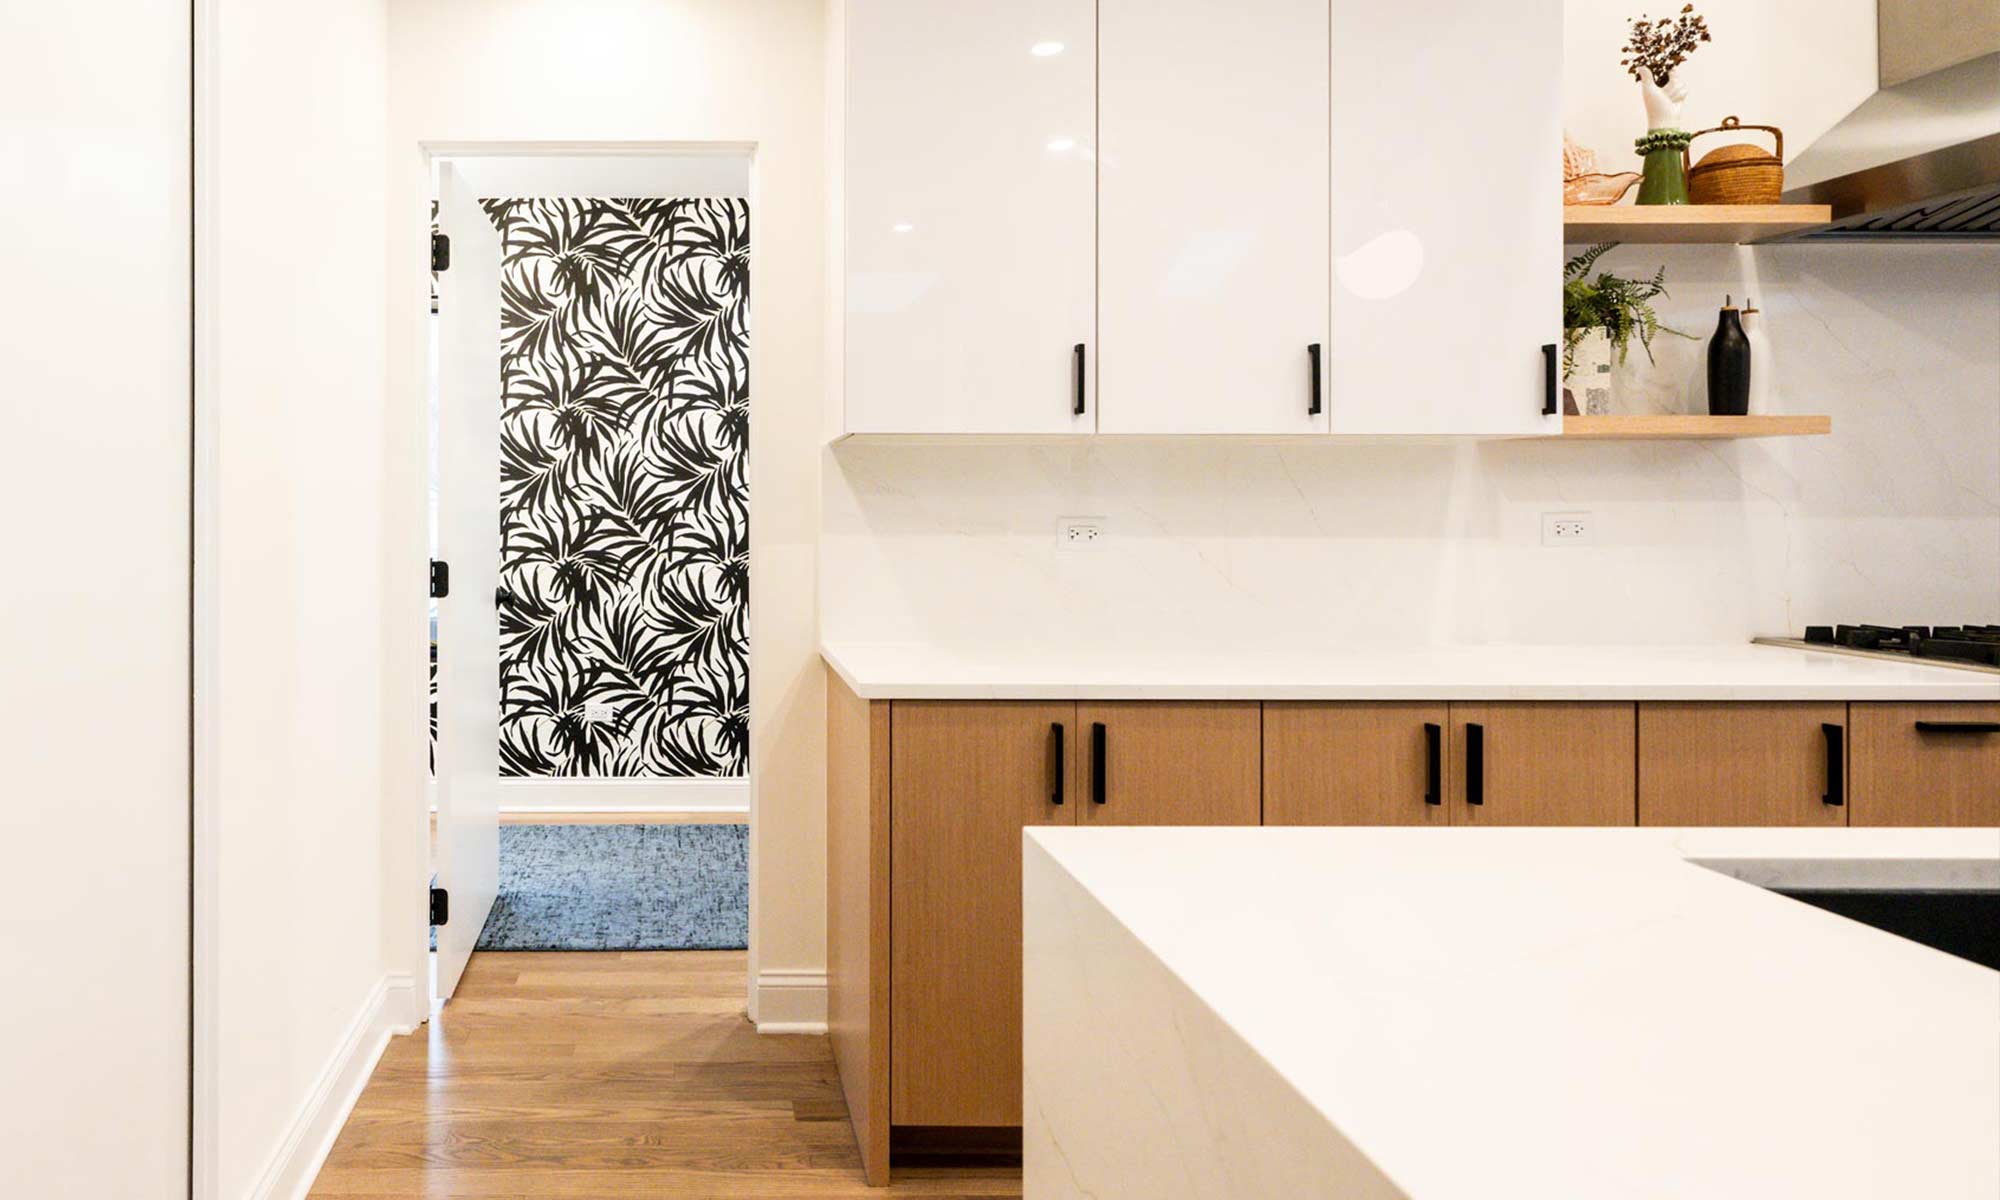 Indian Head Park luxury kithcen remodel by LivCo featuring wood, black, and gloss white modern cabinetry with view towards textured wallpaper in office and laundry